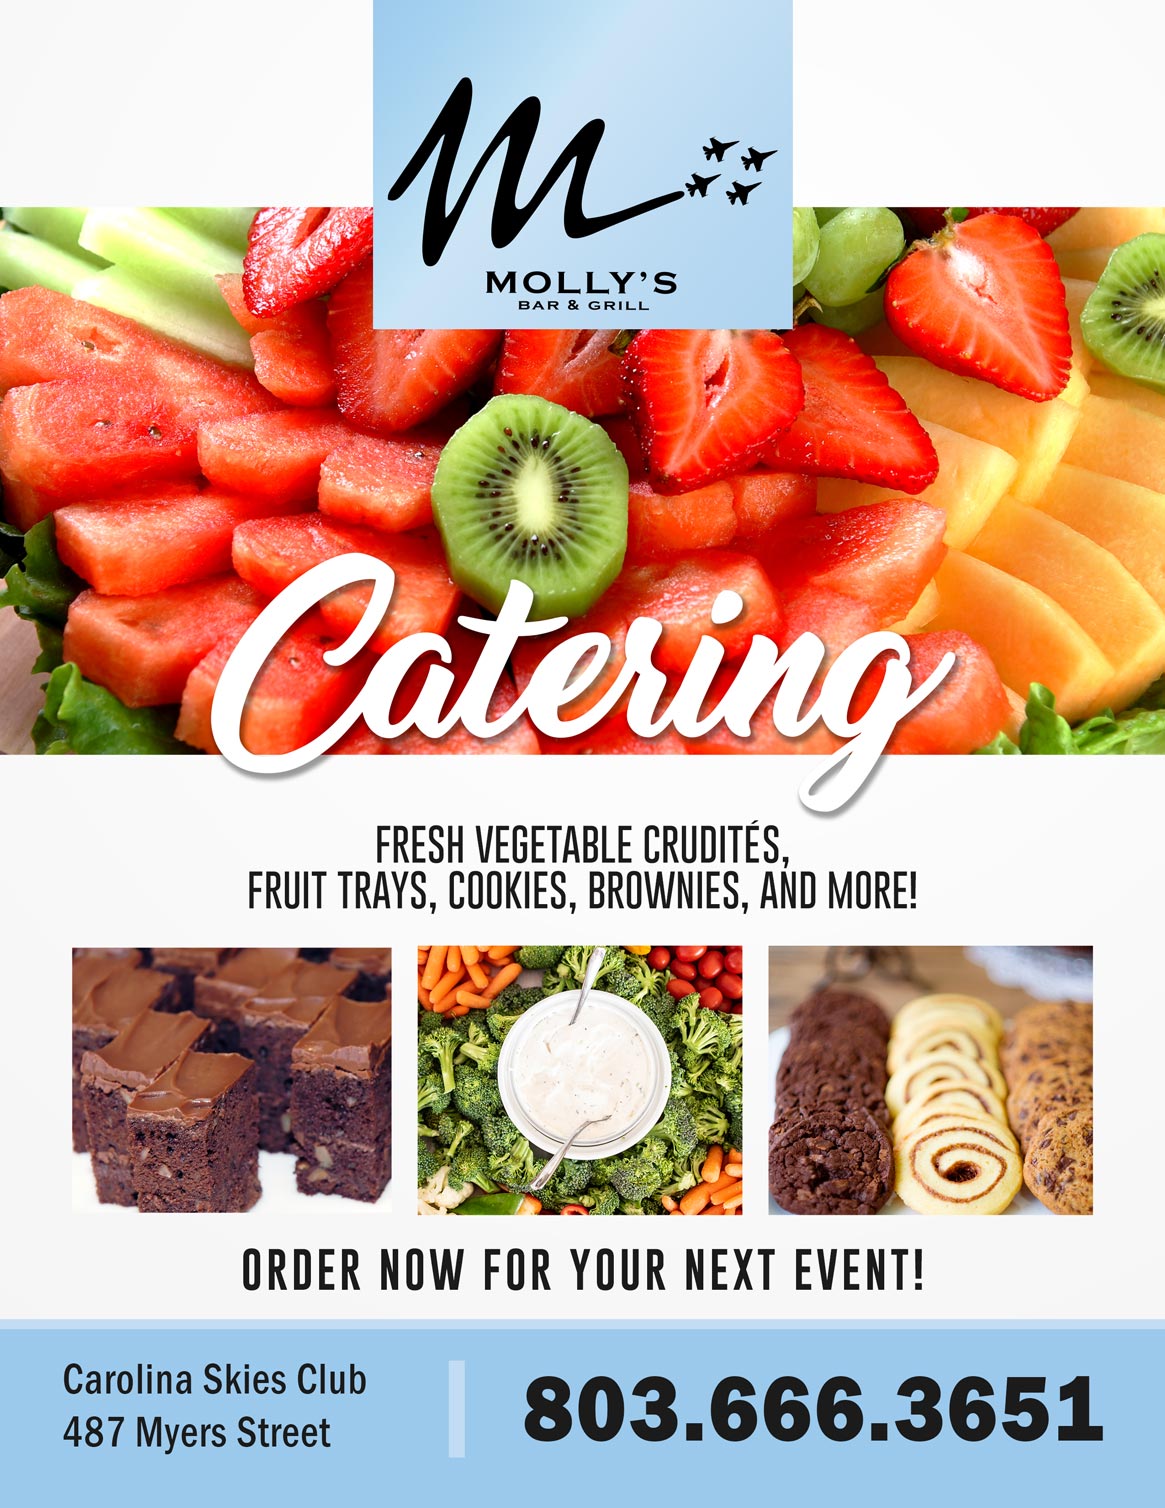 Catering By Molly's